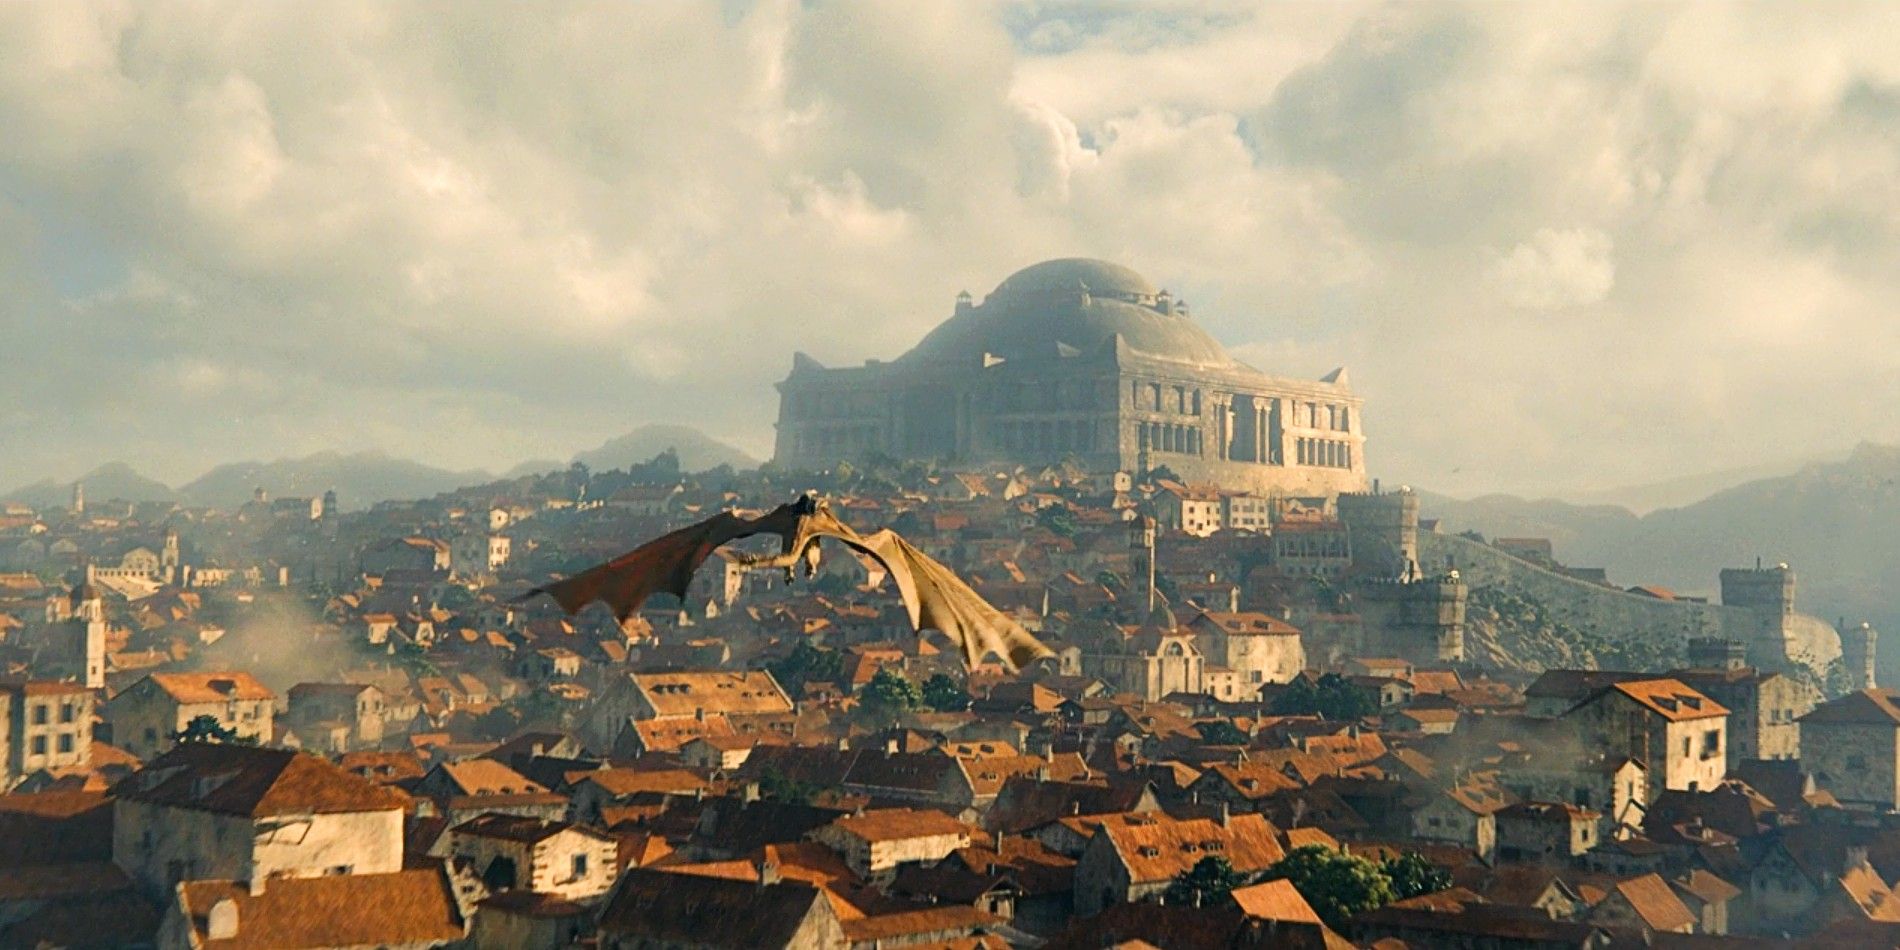 Milly Alcock as young Rhaenyra Targaryen on the back of Syrax in House of the Dragon with a backdrop of King's Landing